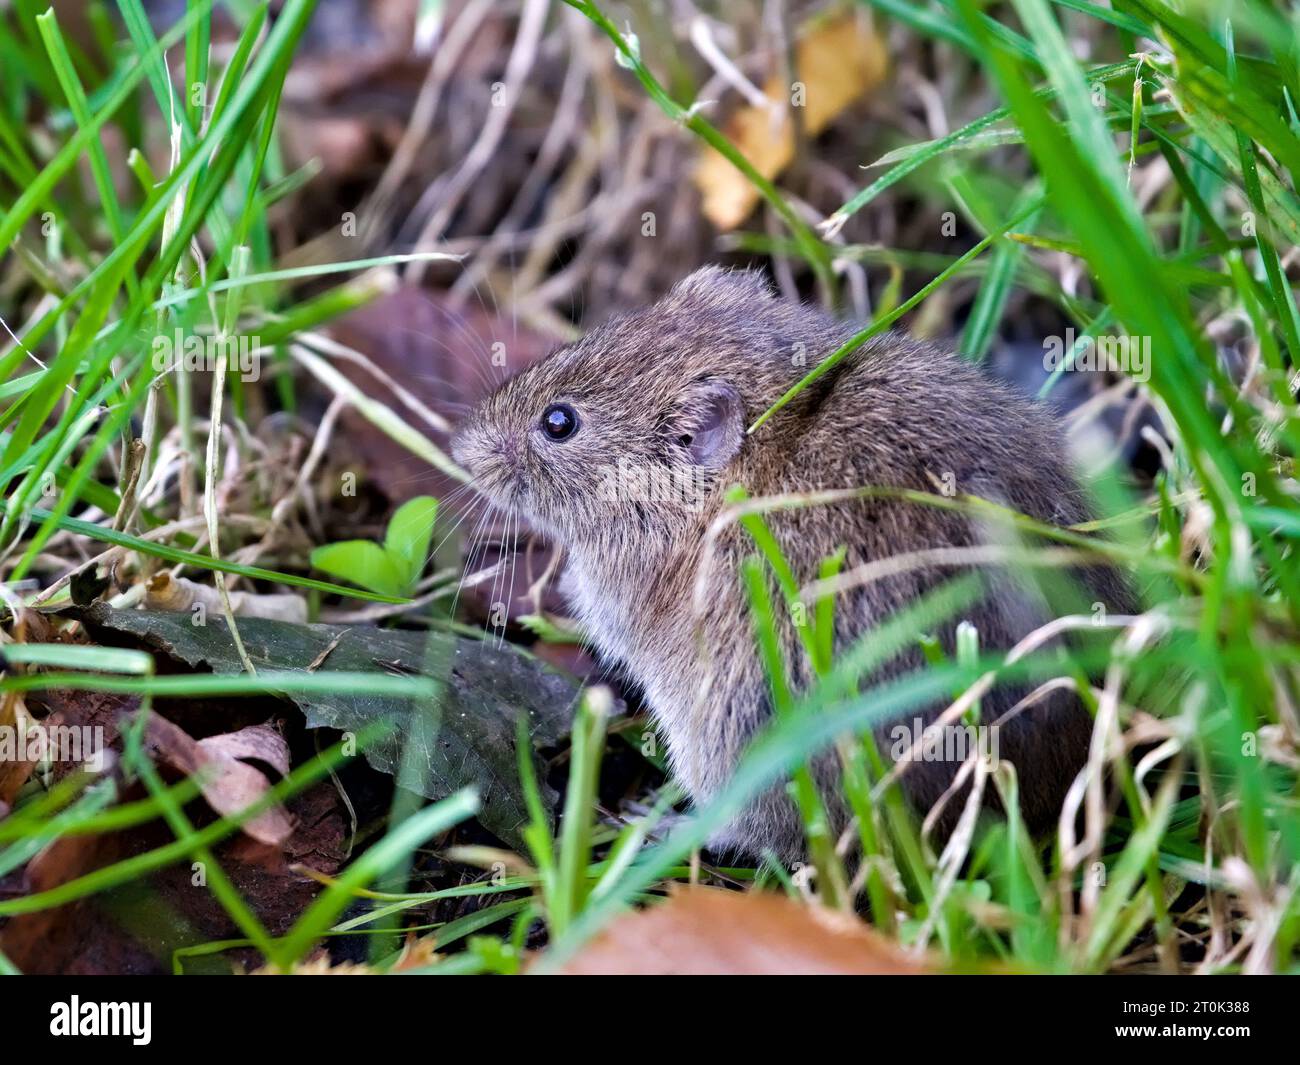 https://c8.alamy.com/comp/2T0K388/microtus-arvalis-aka-common-vole-is-eating-grass-in-front-of-his-burrow-early-autumn-czech-republic-nature-2T0K388.jpg